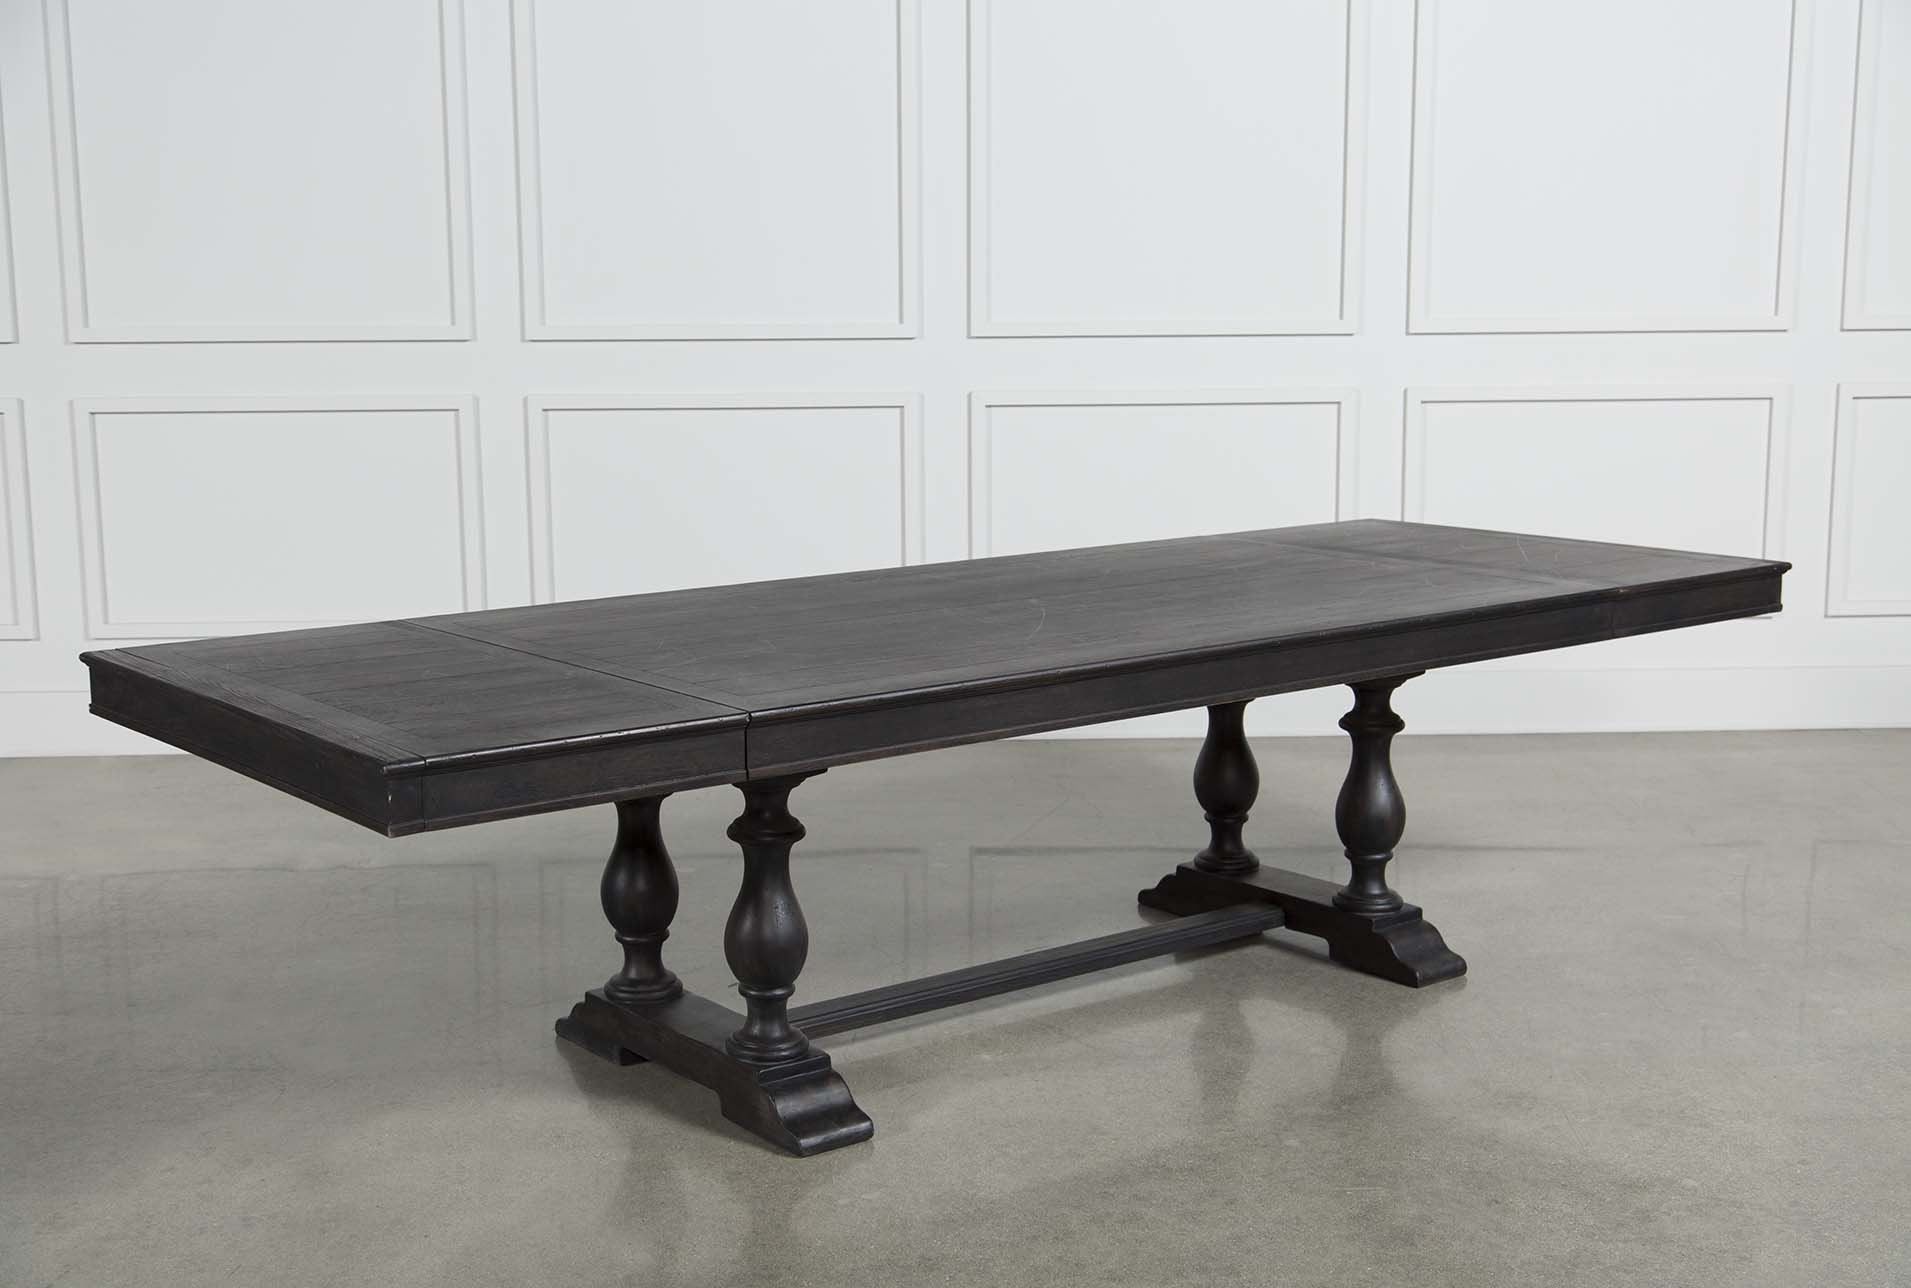 Chapleau Extension Dining Table – Back | Dining Room Ideas Regarding 2018 Chapleau Extension Dining Tables (View 1 of 20)